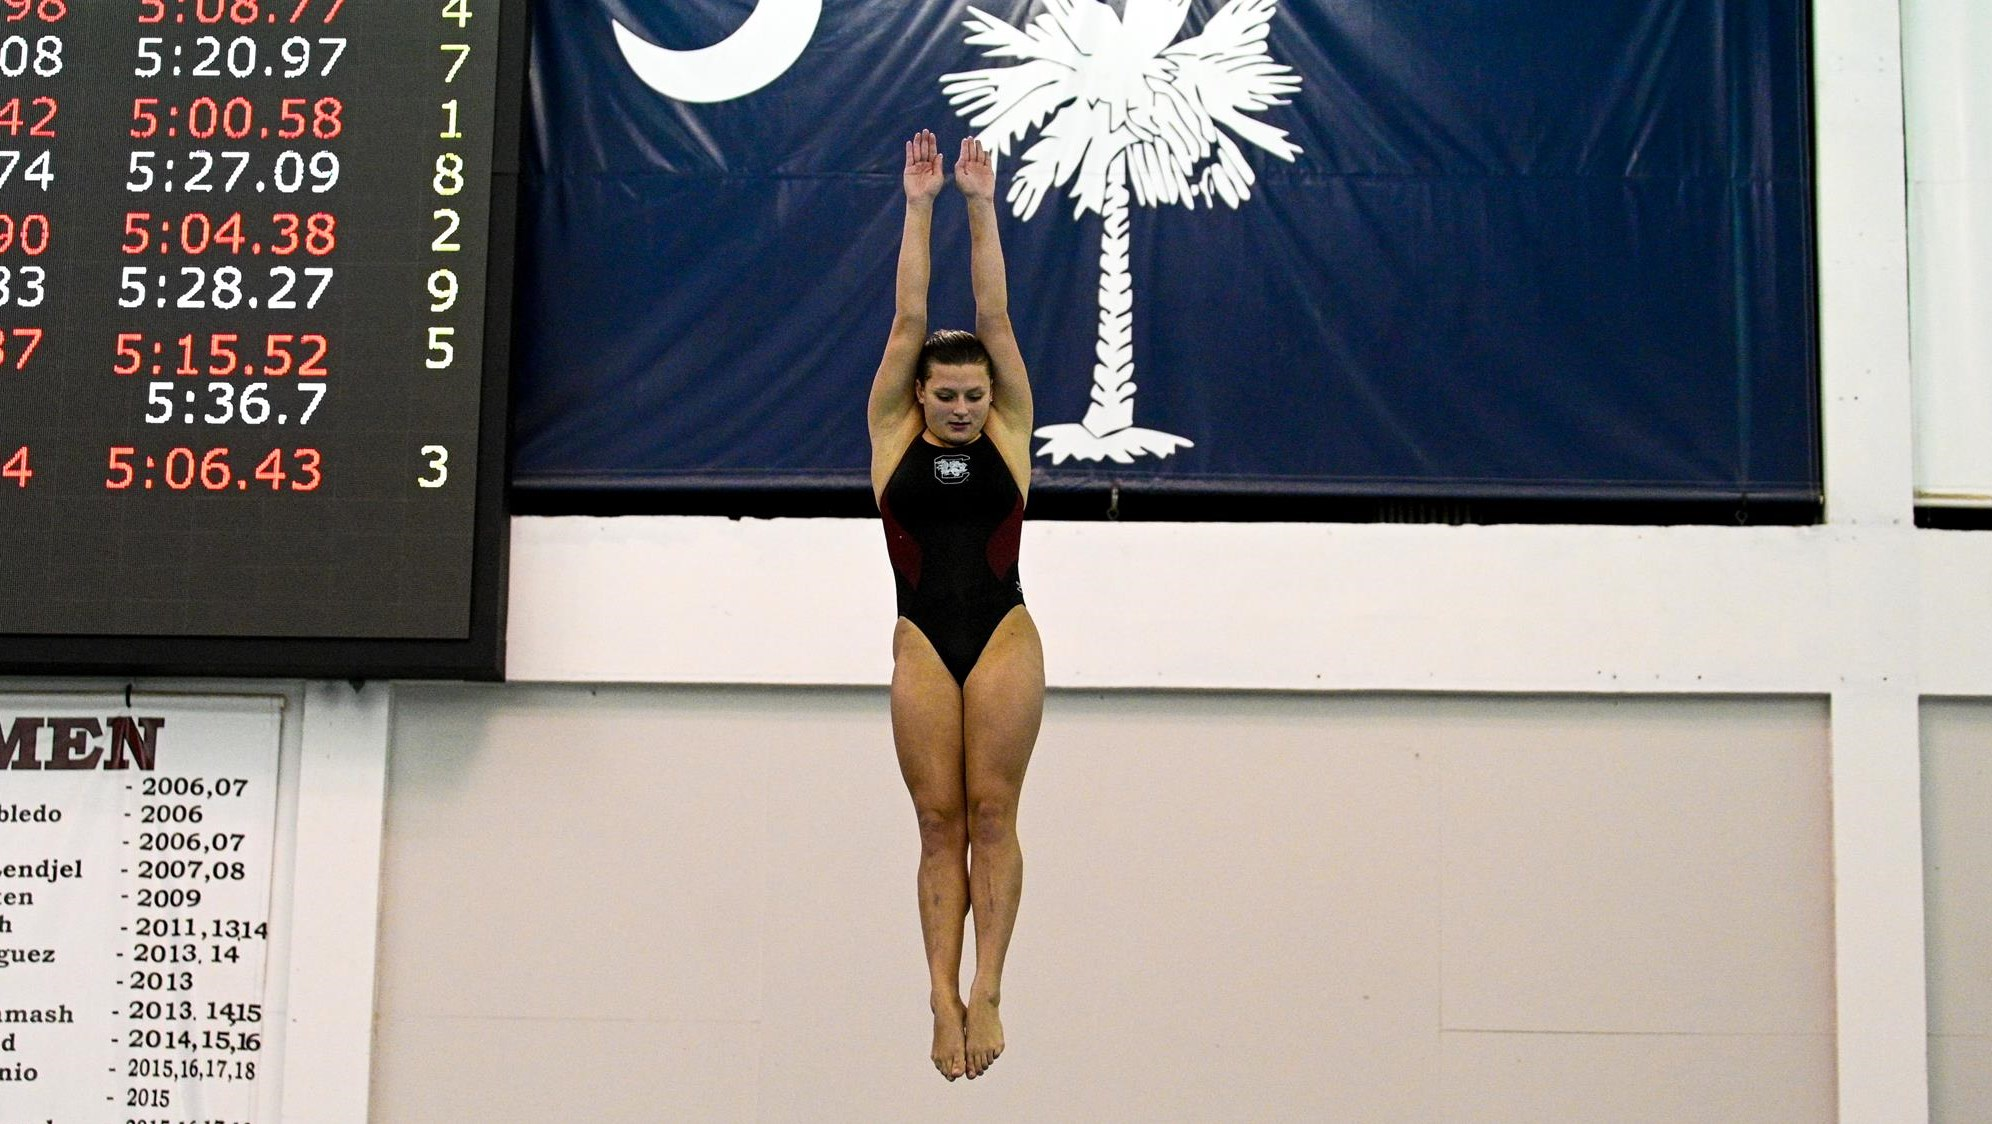 Divers to Compete in Knoxville